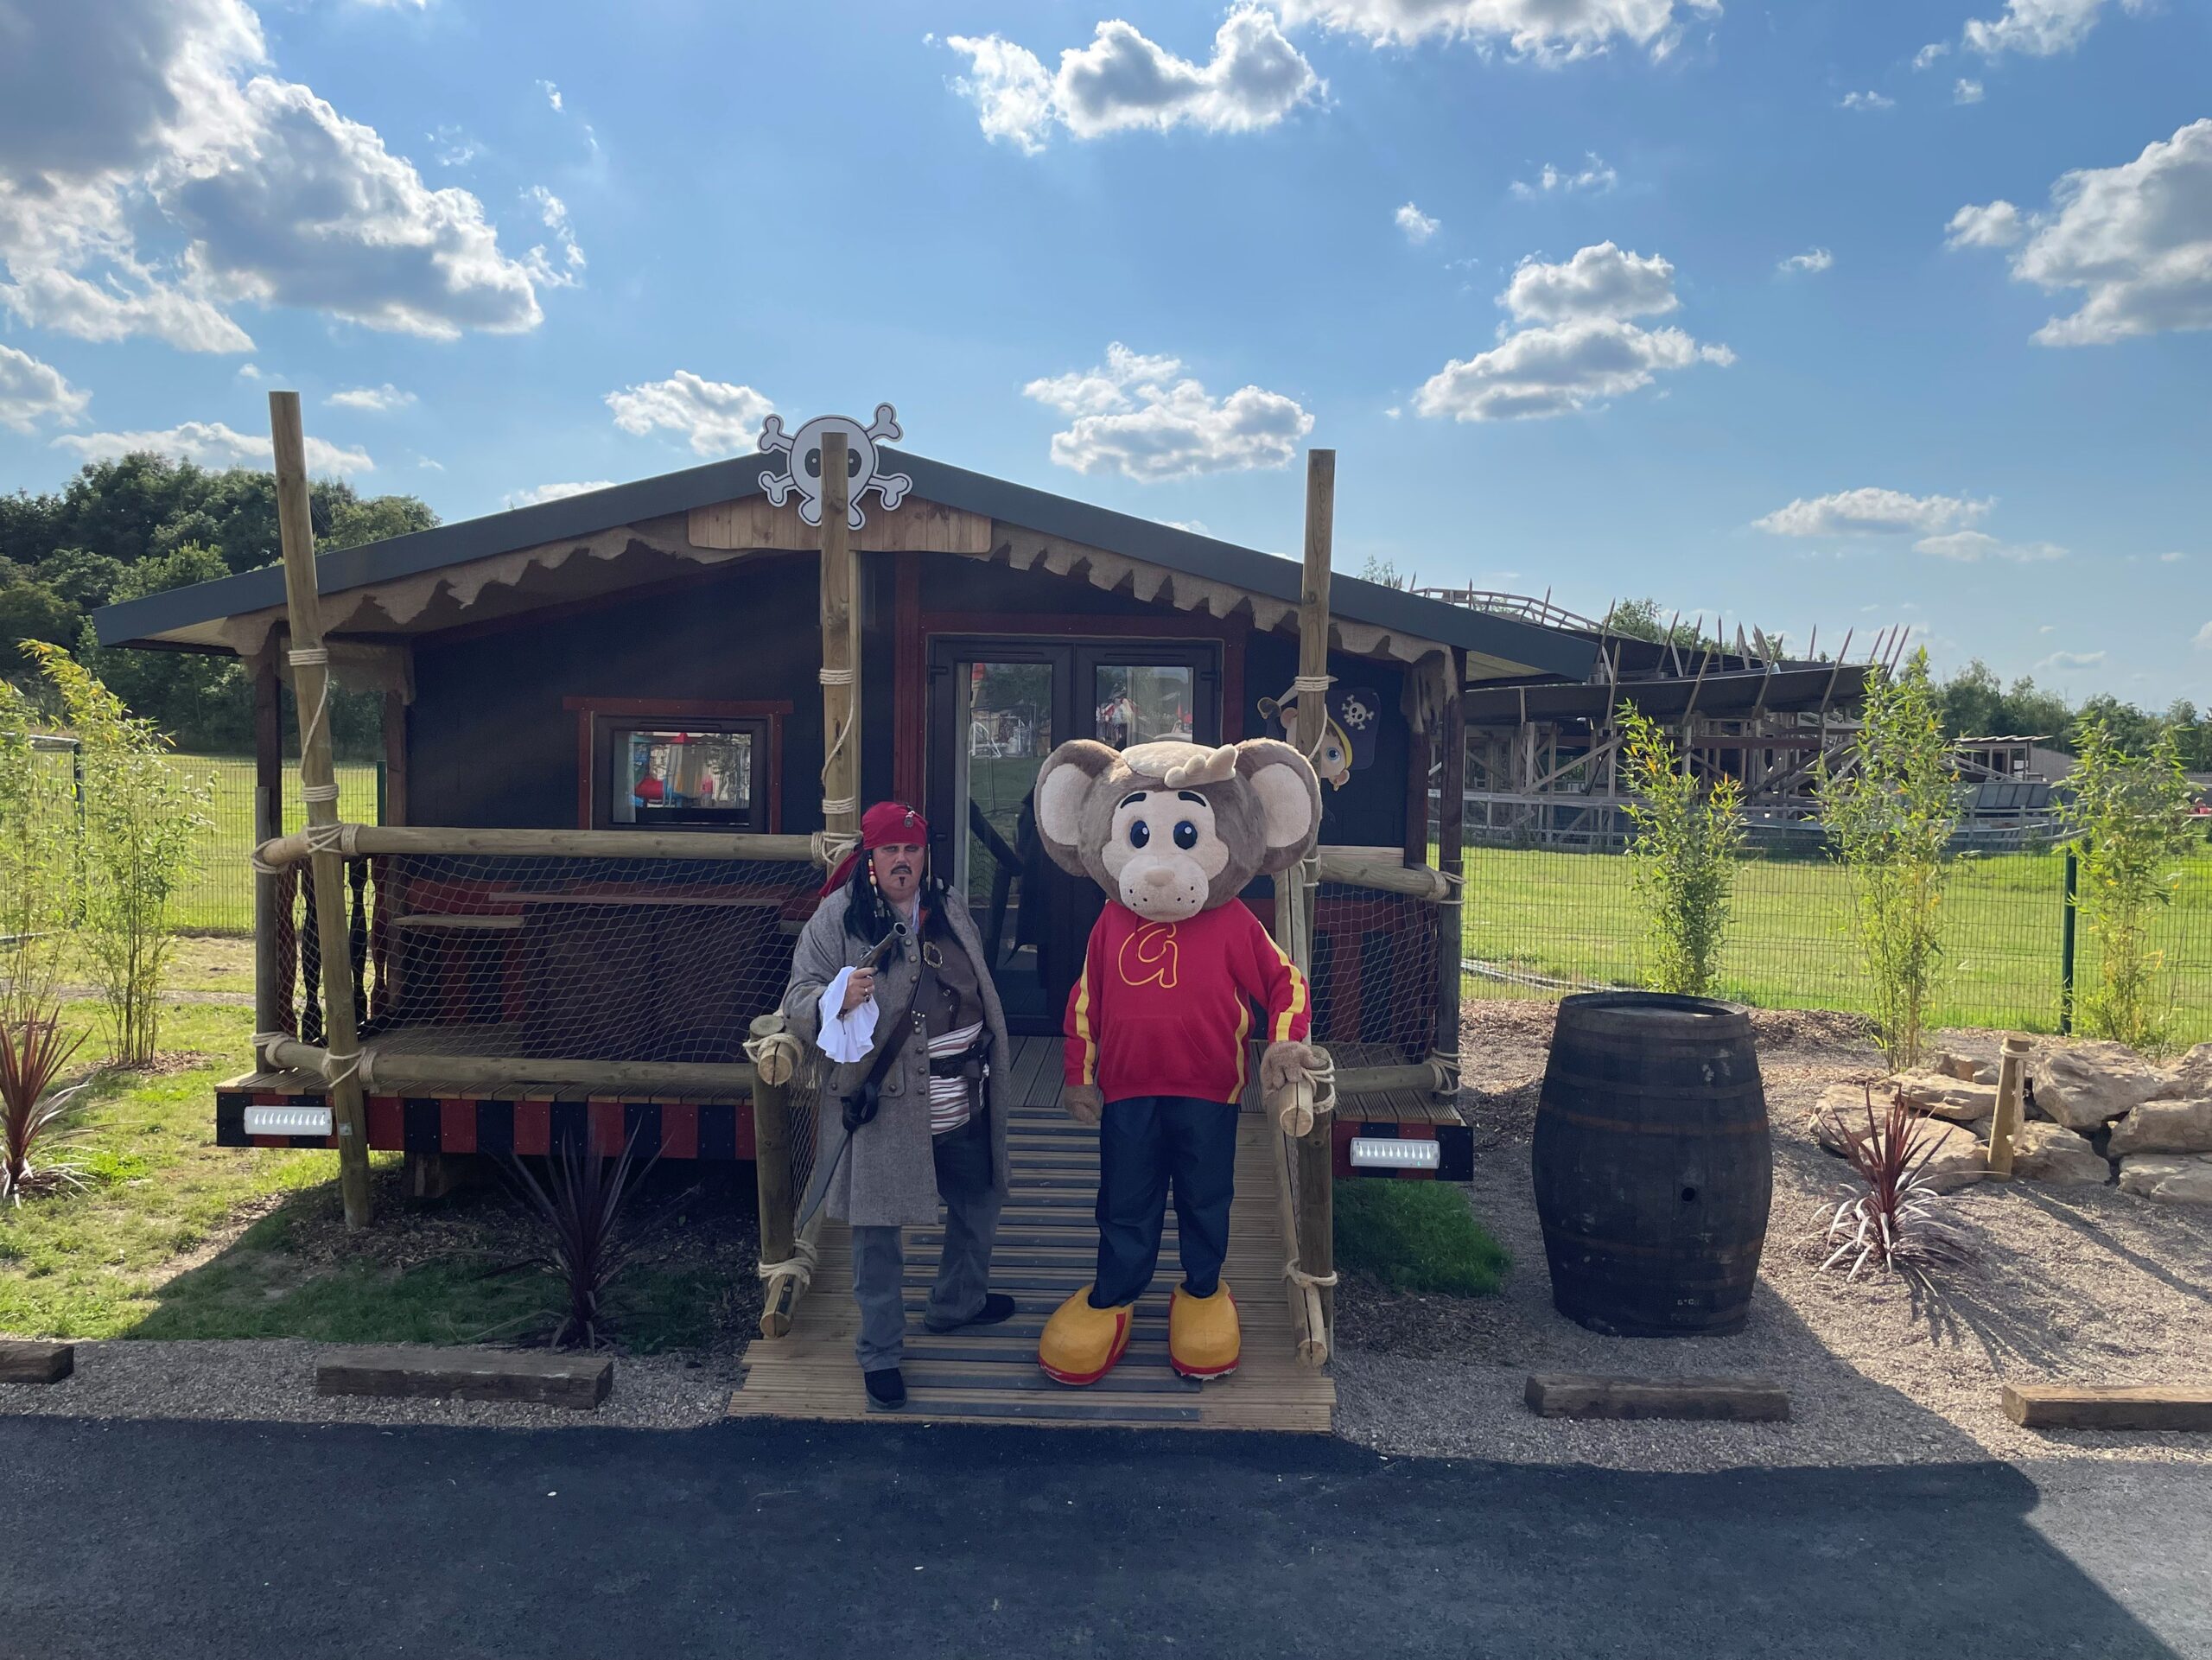 New themed accommodation adds the wow factor at Gulliver’s Valley